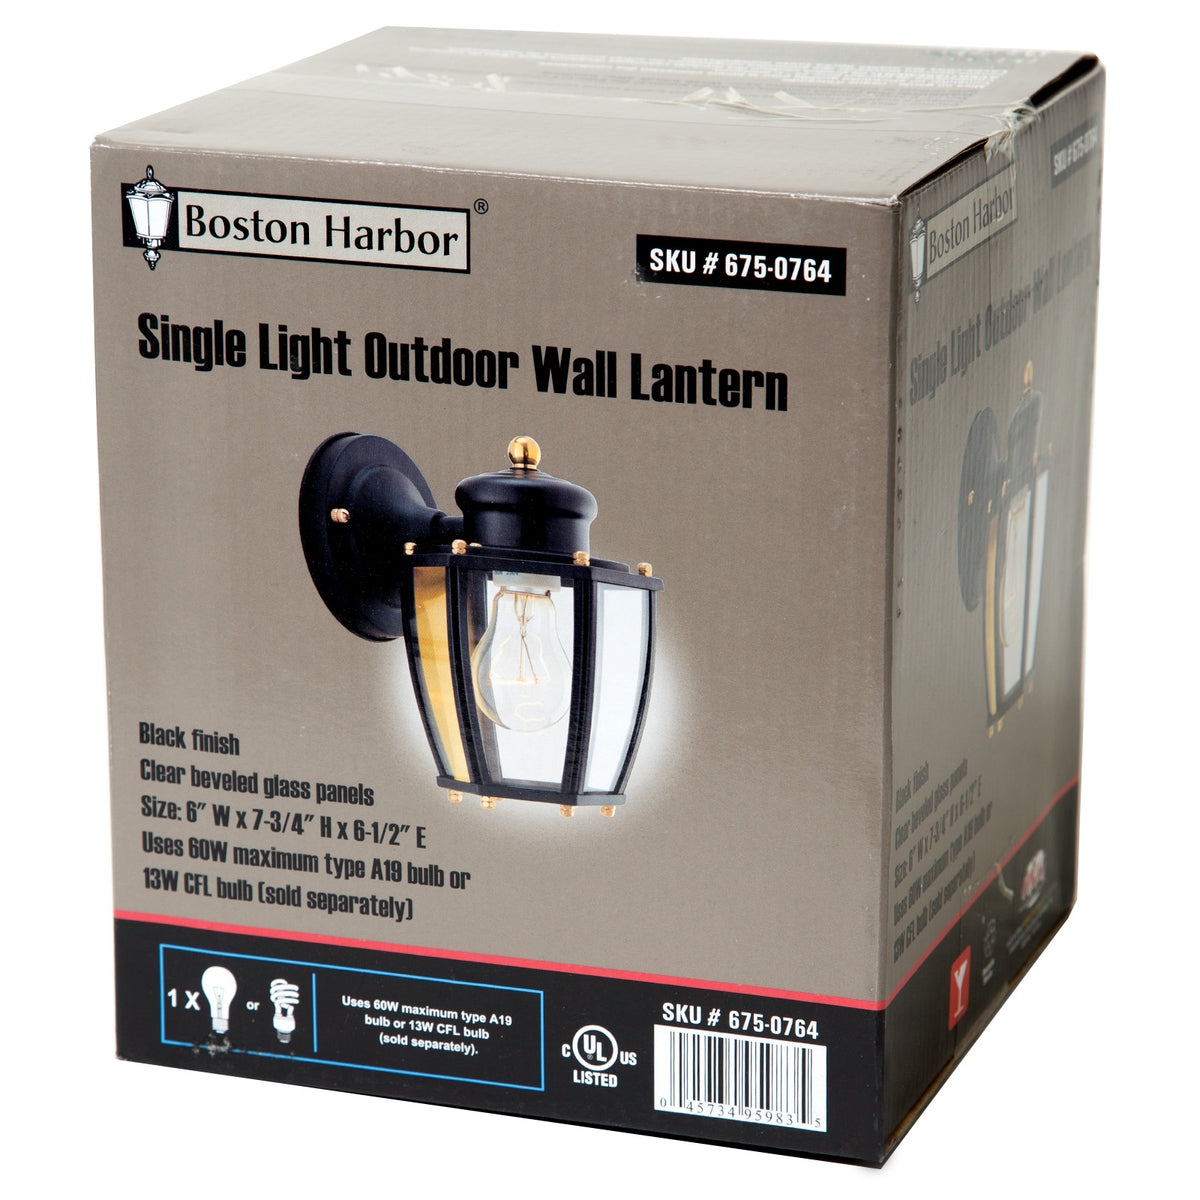 buy wall mount light fixtures at cheap rate in bulk. wholesale & retail lighting parts & fixtures store. home décor ideas, maintenance, repair replacement parts